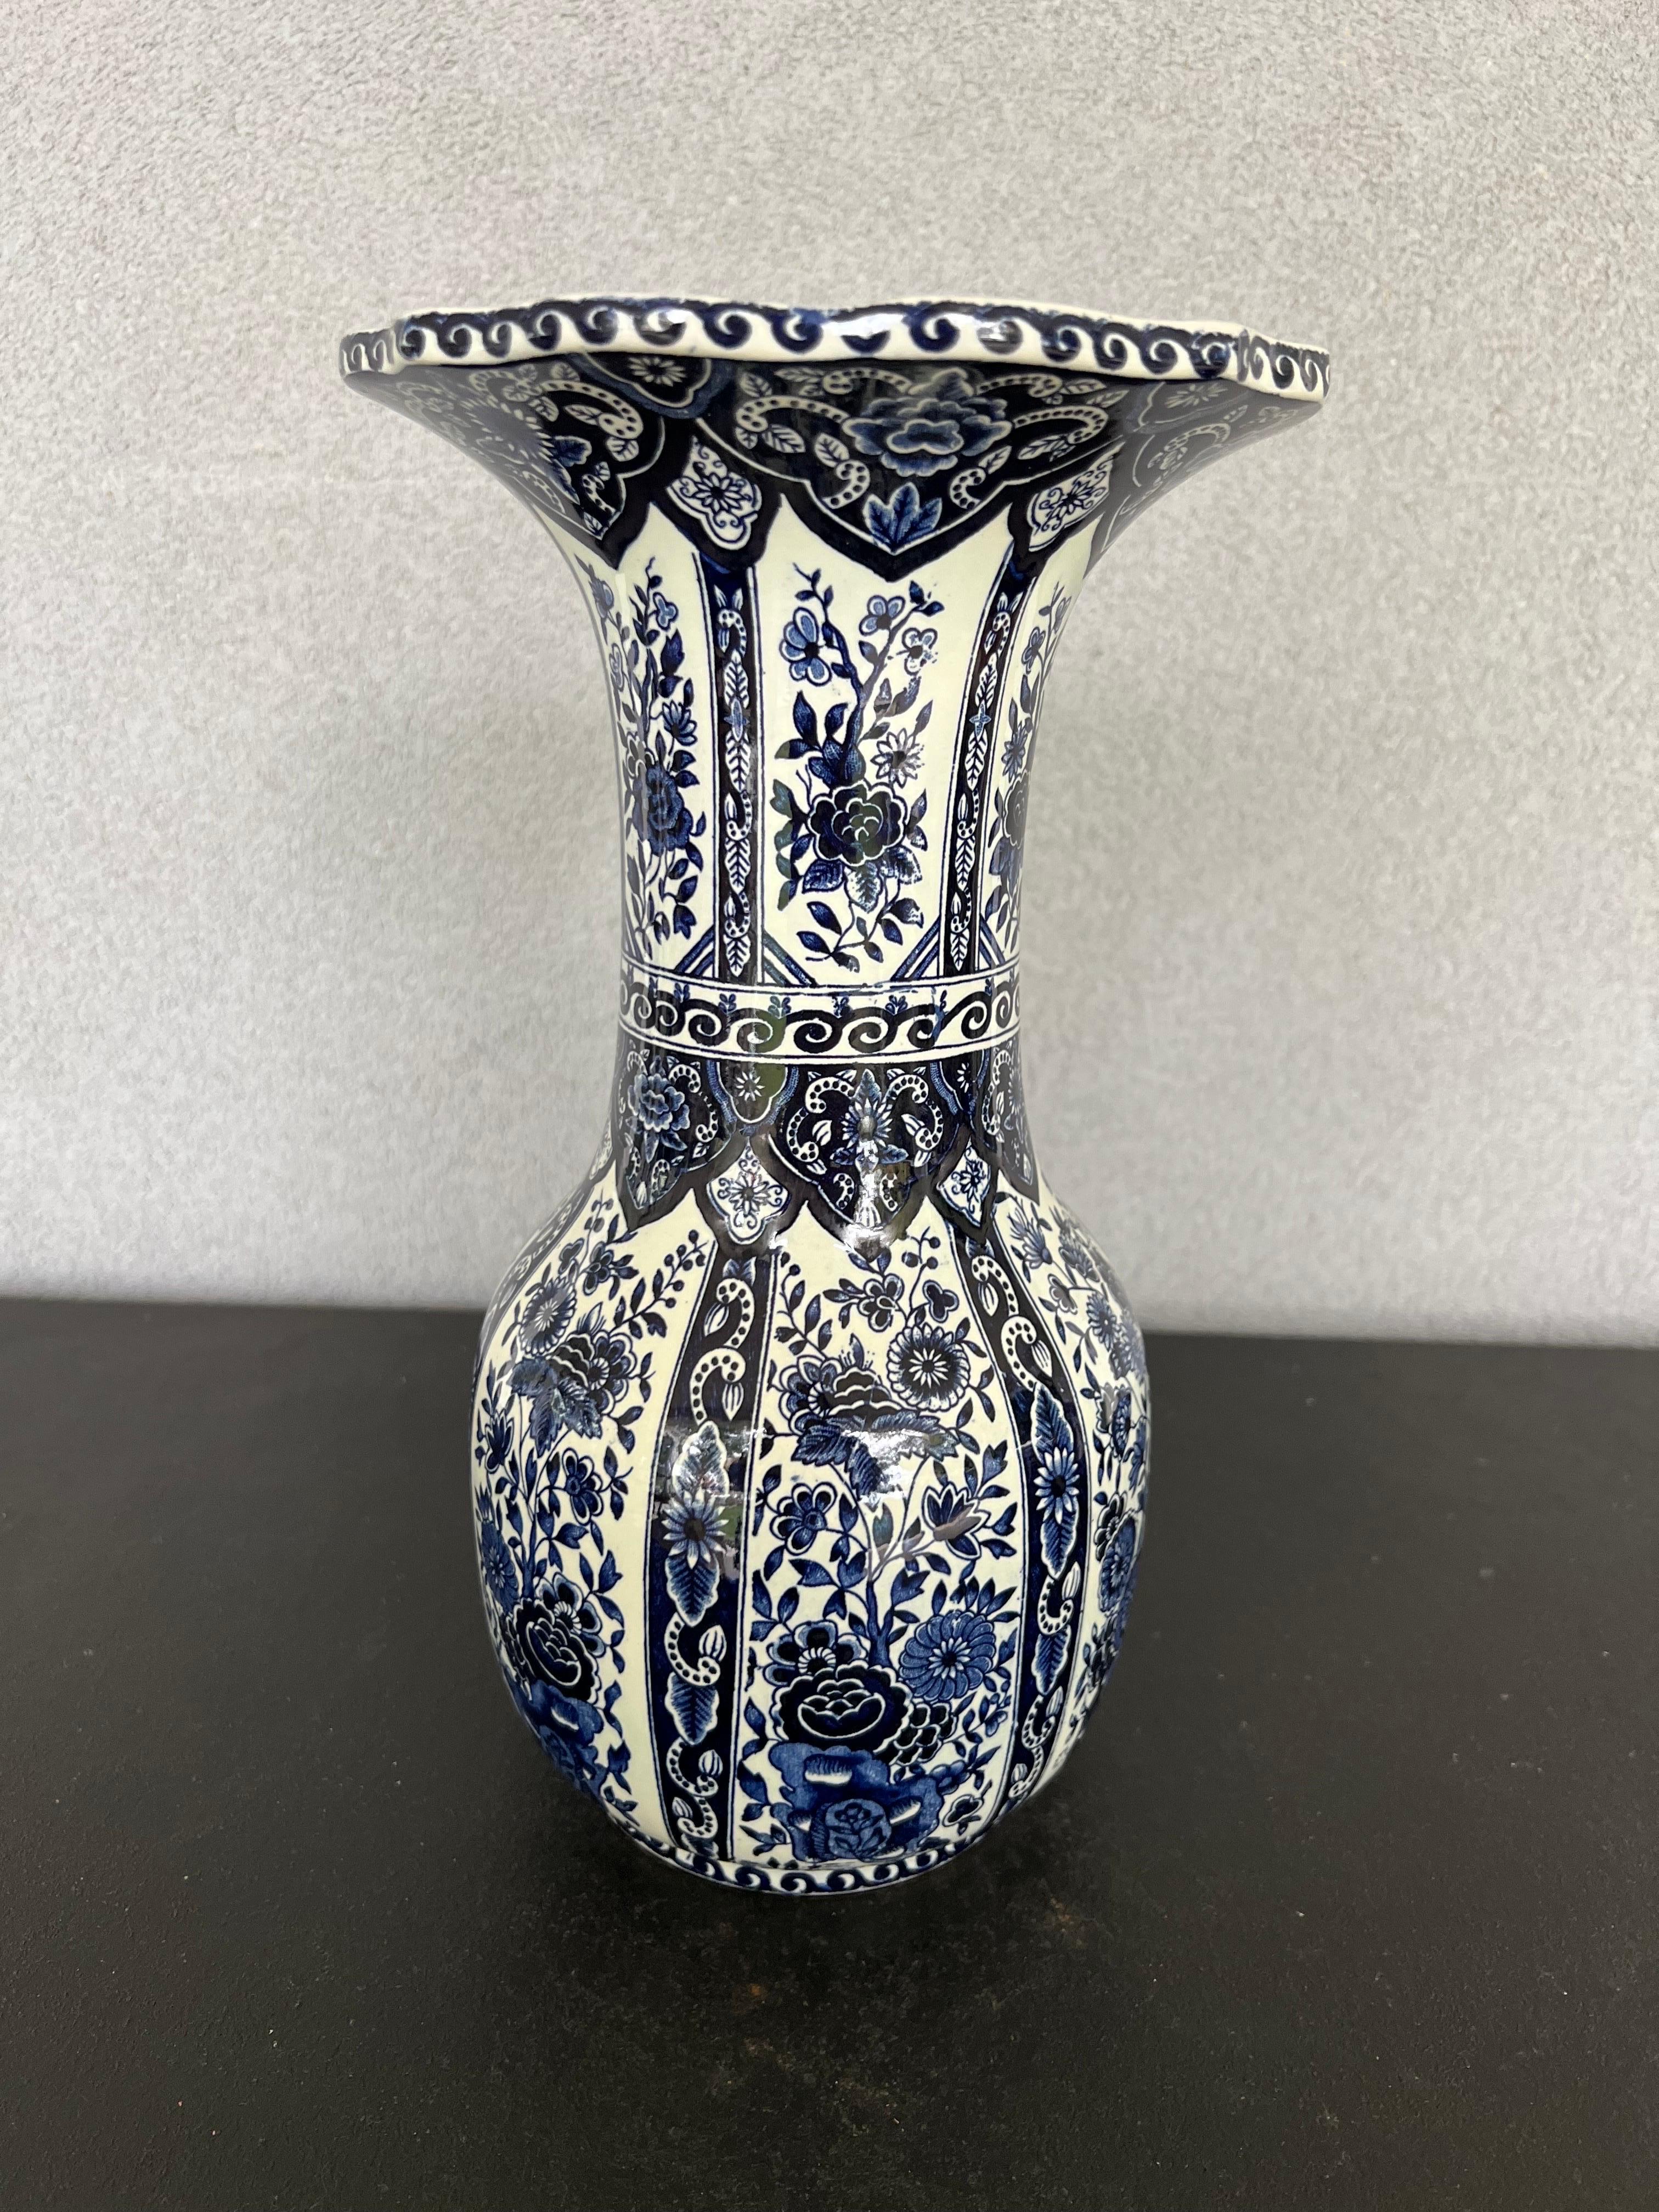 This elegant vintage ceramic Delft vase was created in the Netherlands, circa 1940. Round in shape with a long neck and wide mouth, featuring traditional hand-painted floral decorations. It’s stamped on the bottom, Made by Royal , Delft, Holland.